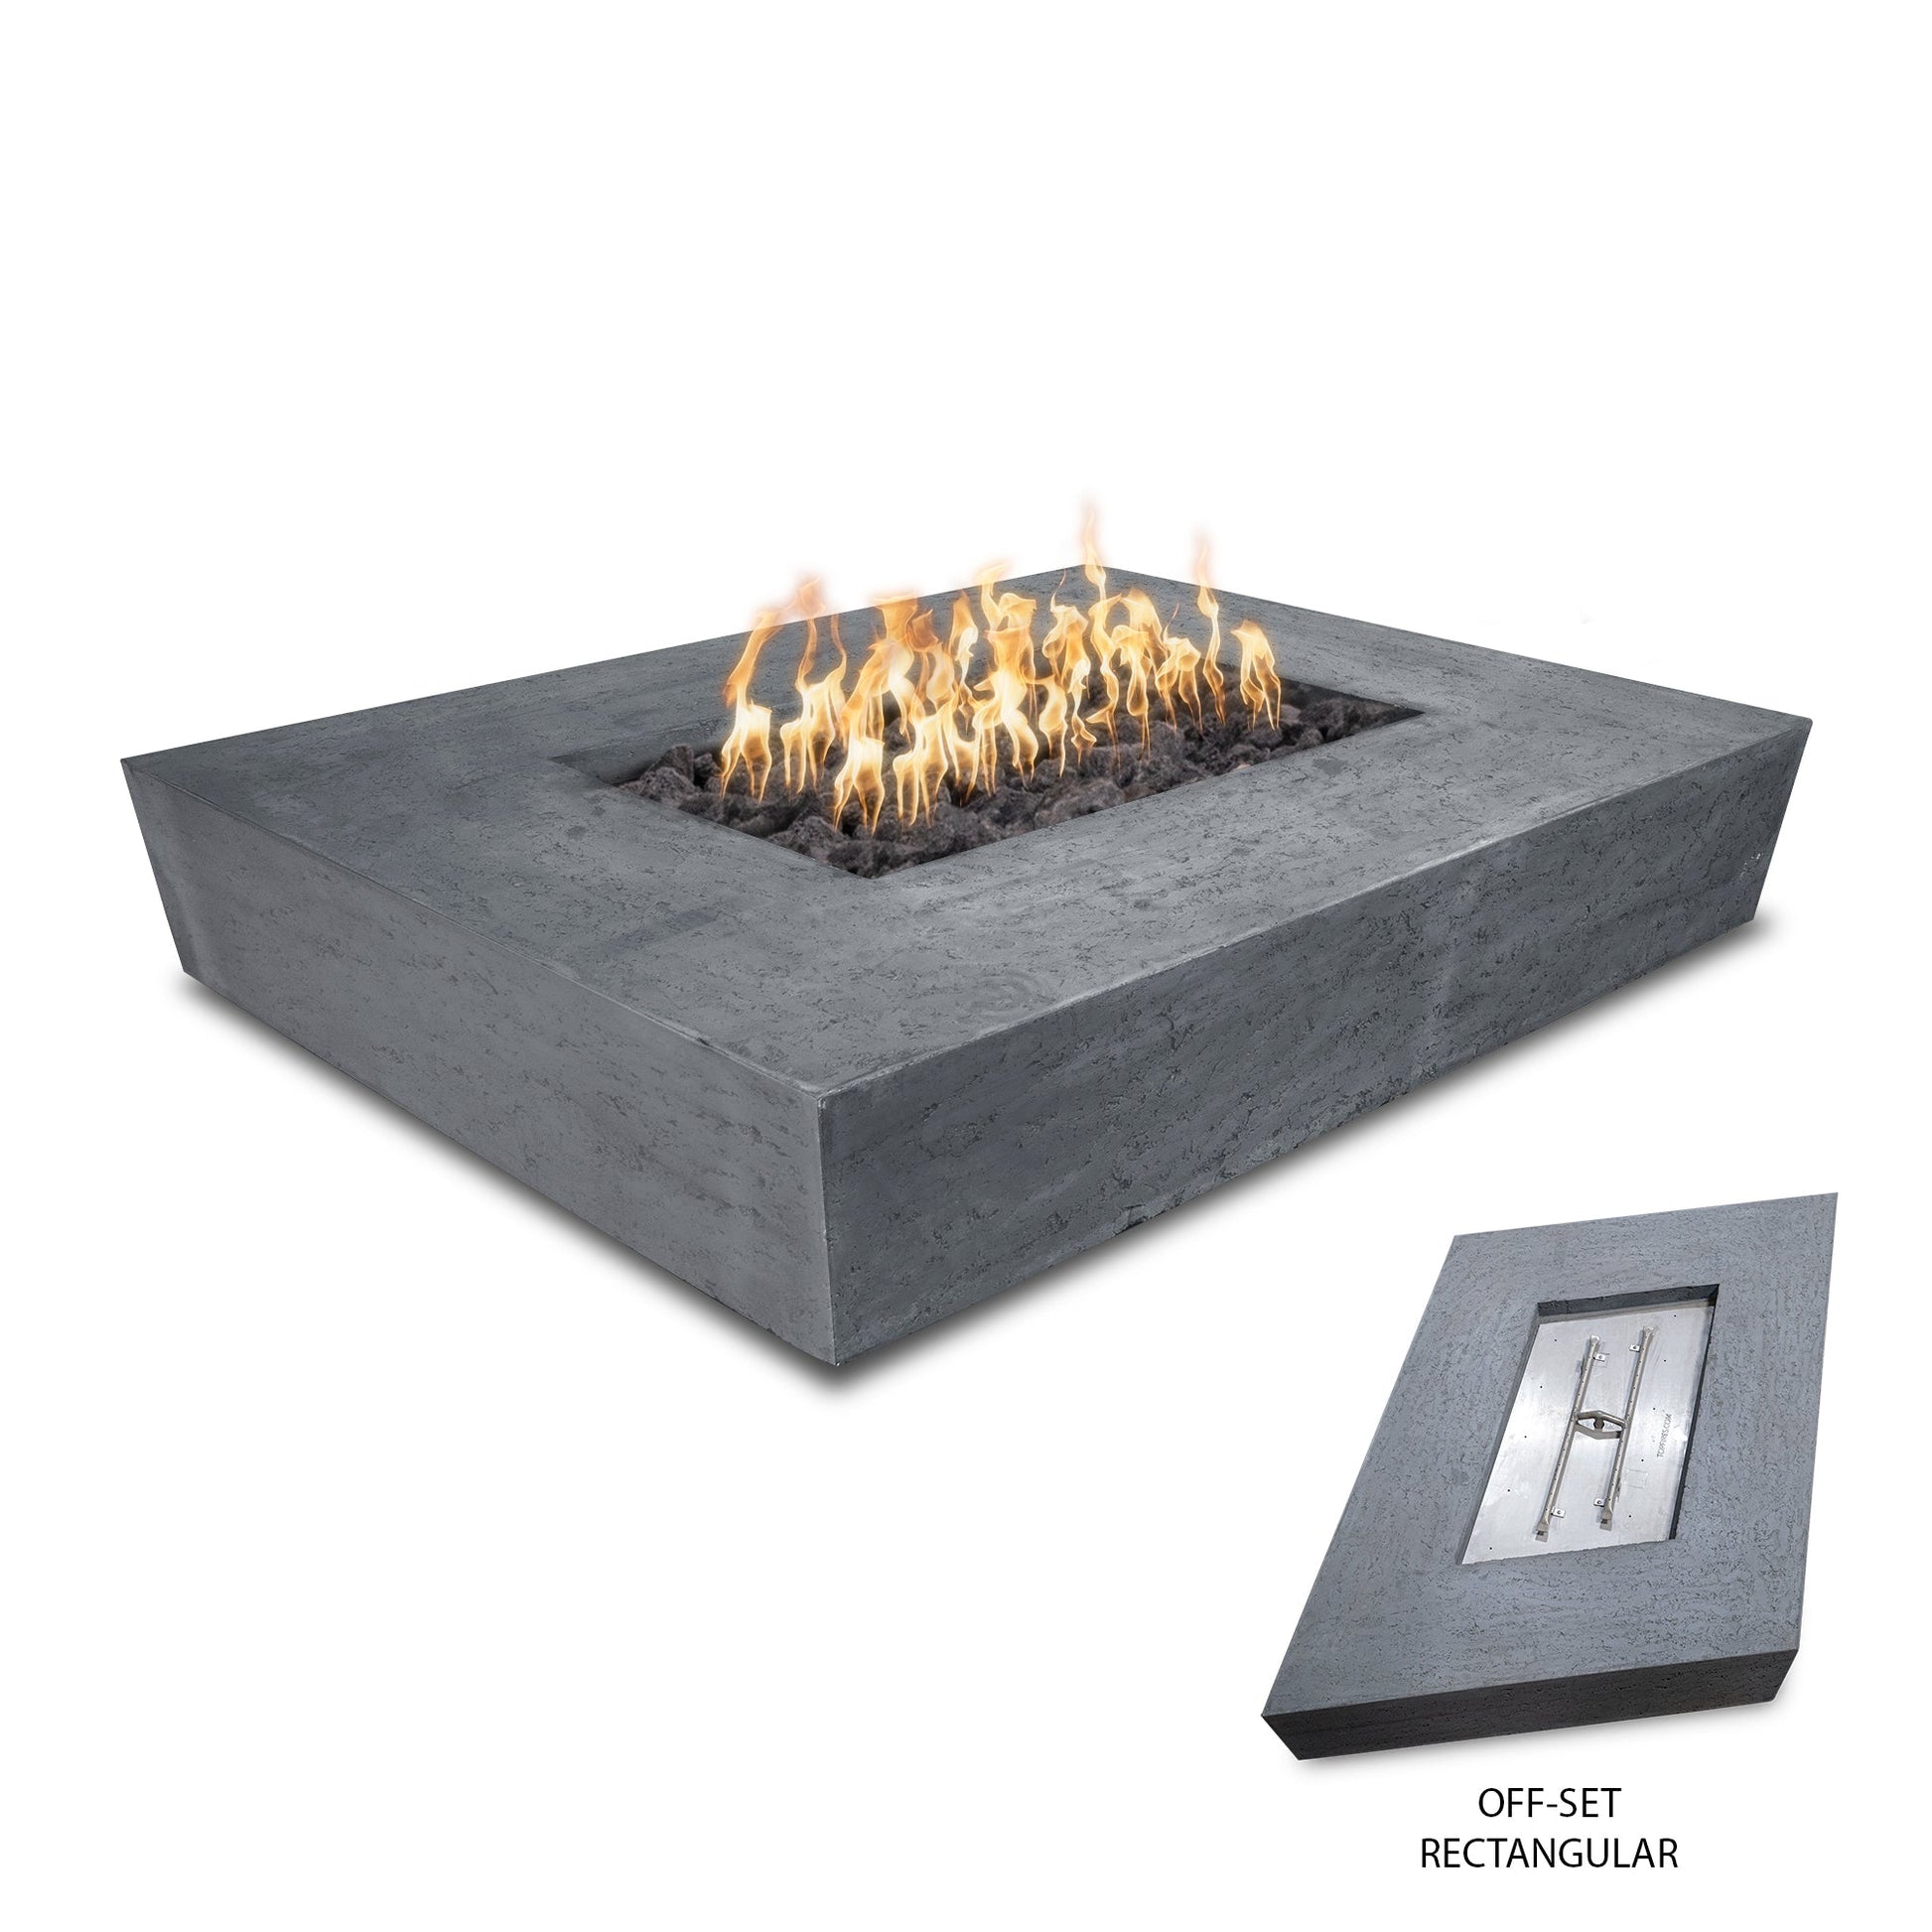 The Outdoor Plus Rectangular Heiko 58" Metallic Silver GFRC Concrete Natural Gas Fire Pit with 110V Electronic Ignition